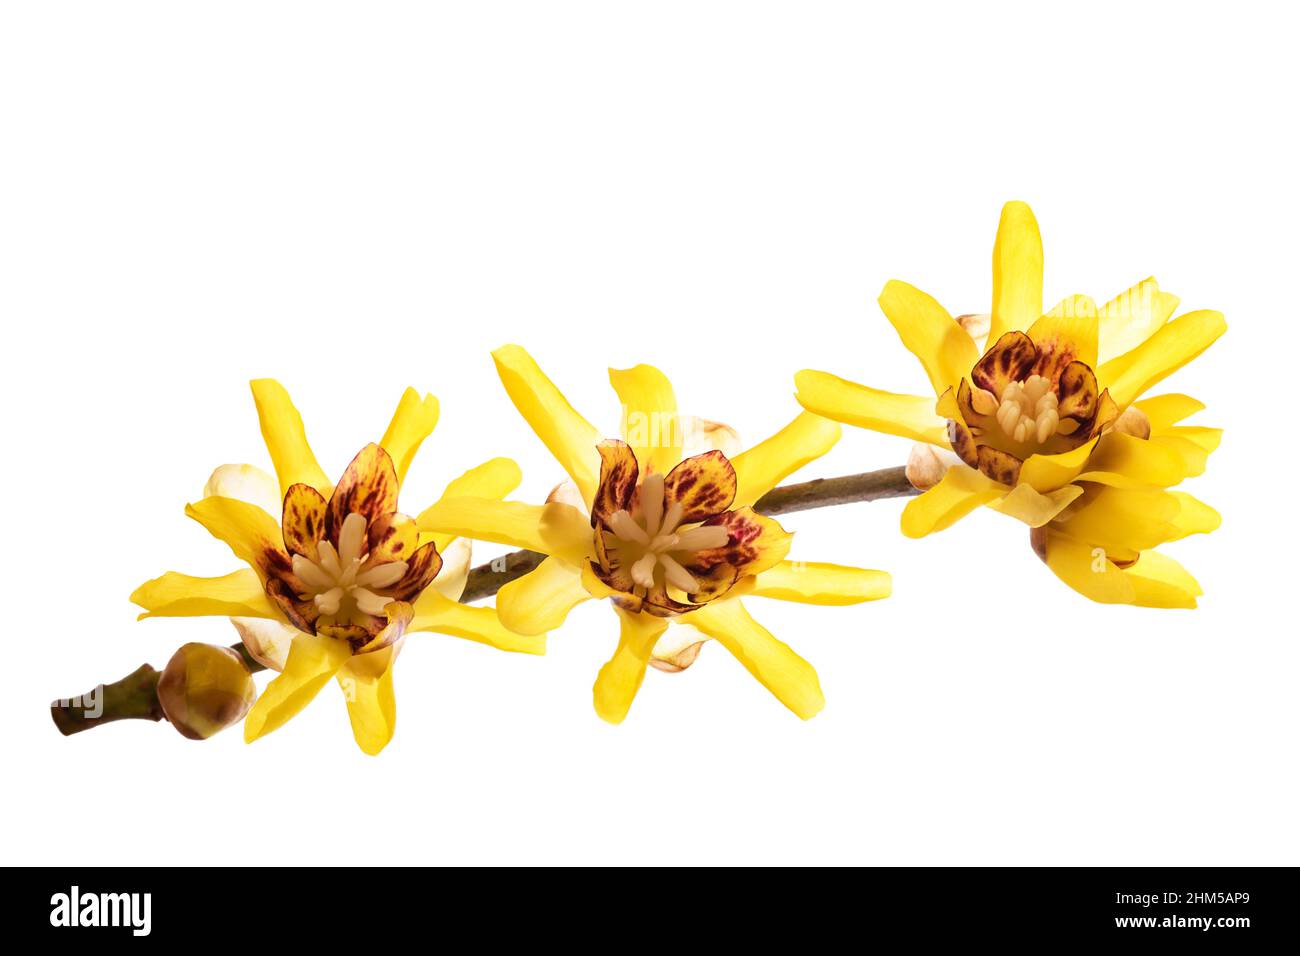 Wintersweet or Chimonanthus flowers isolated on white background Stock Photo